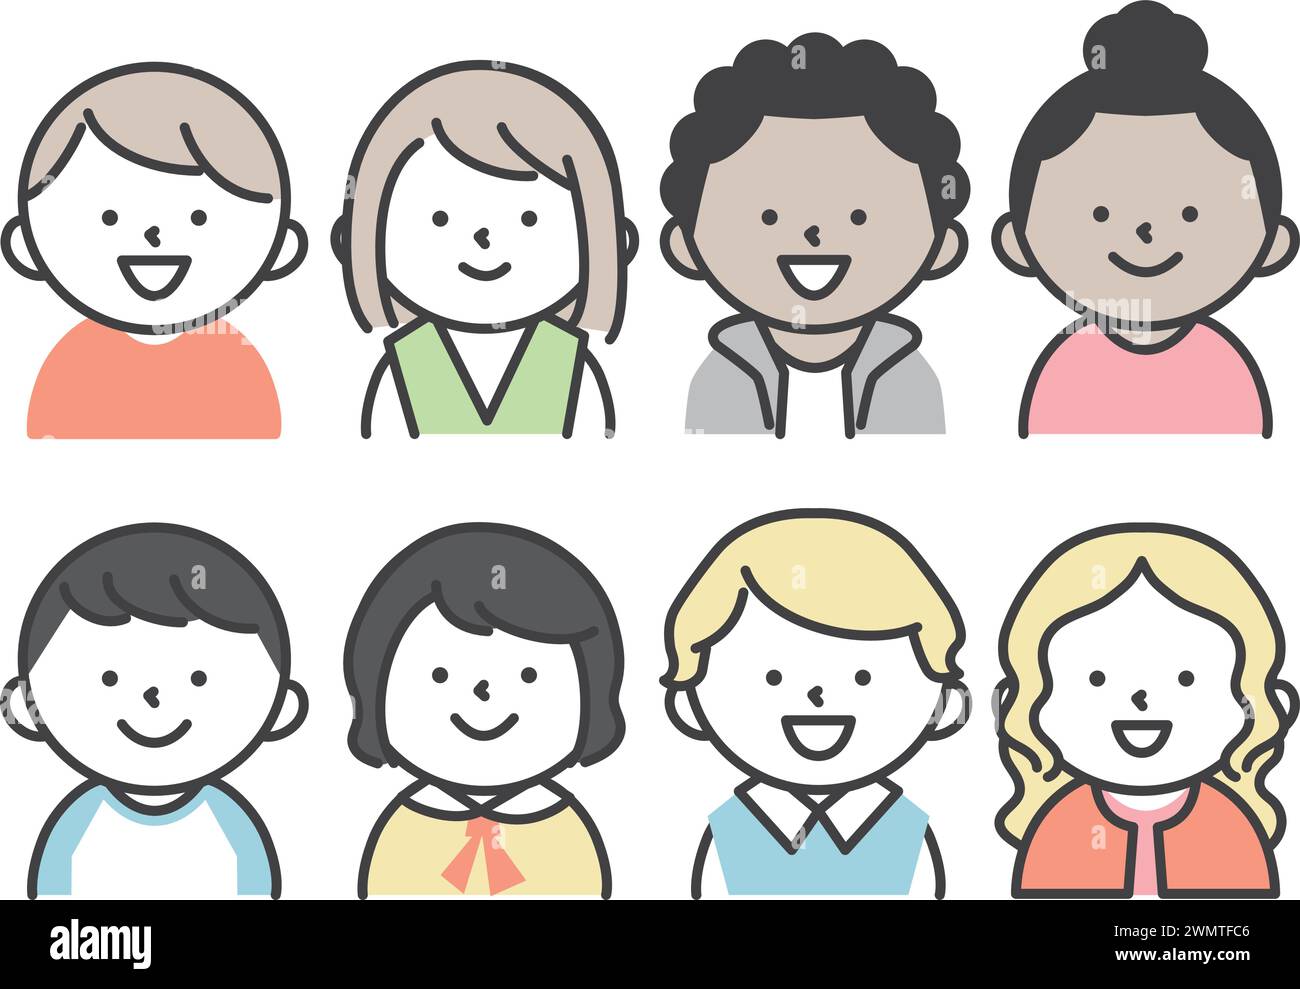 An illustration set of children from various countries around the world. upper body with smiling expression. Simple and cute character illustration. Stock Vector